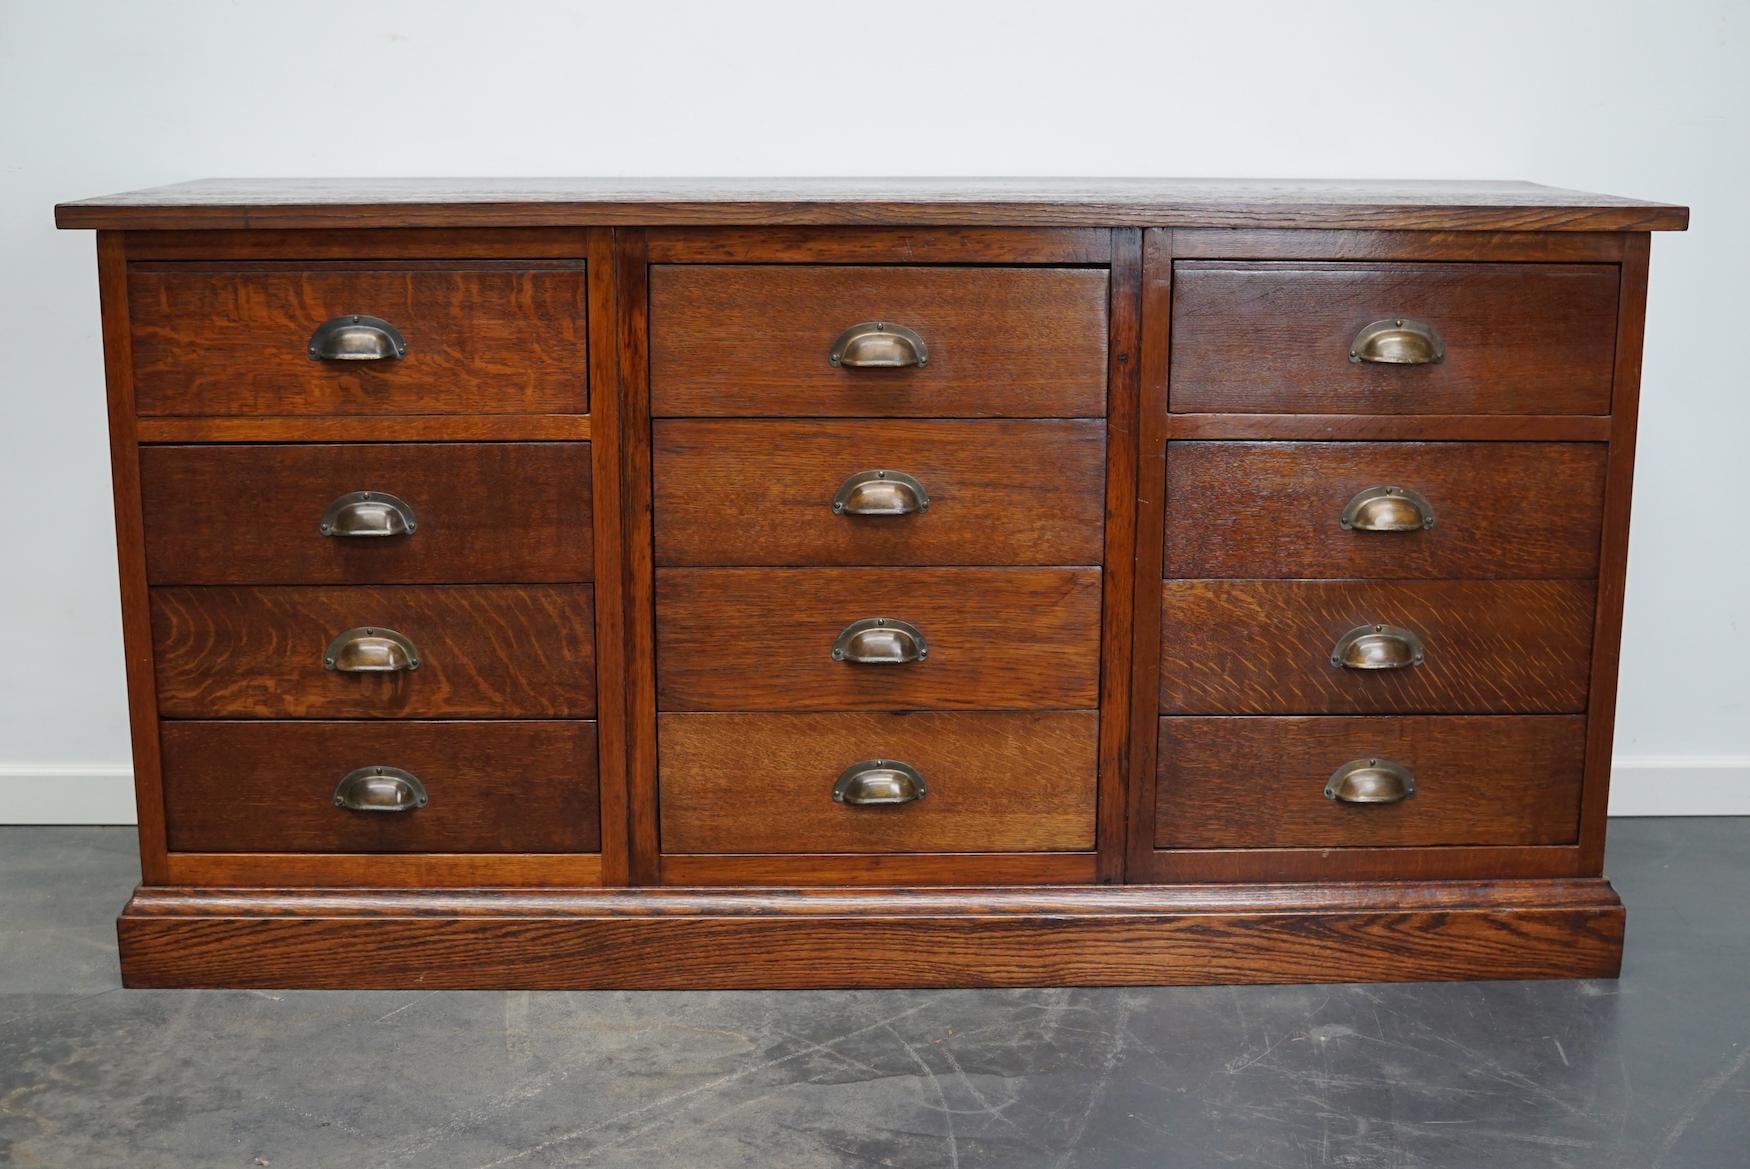 This apothecary cabinet was designed and made from oak circa 1930 in the Netherlands. It features 12 decent sized drawers with brass hardware. The inside of the drawers measure: DWH 41 x 38 x 11 cm.